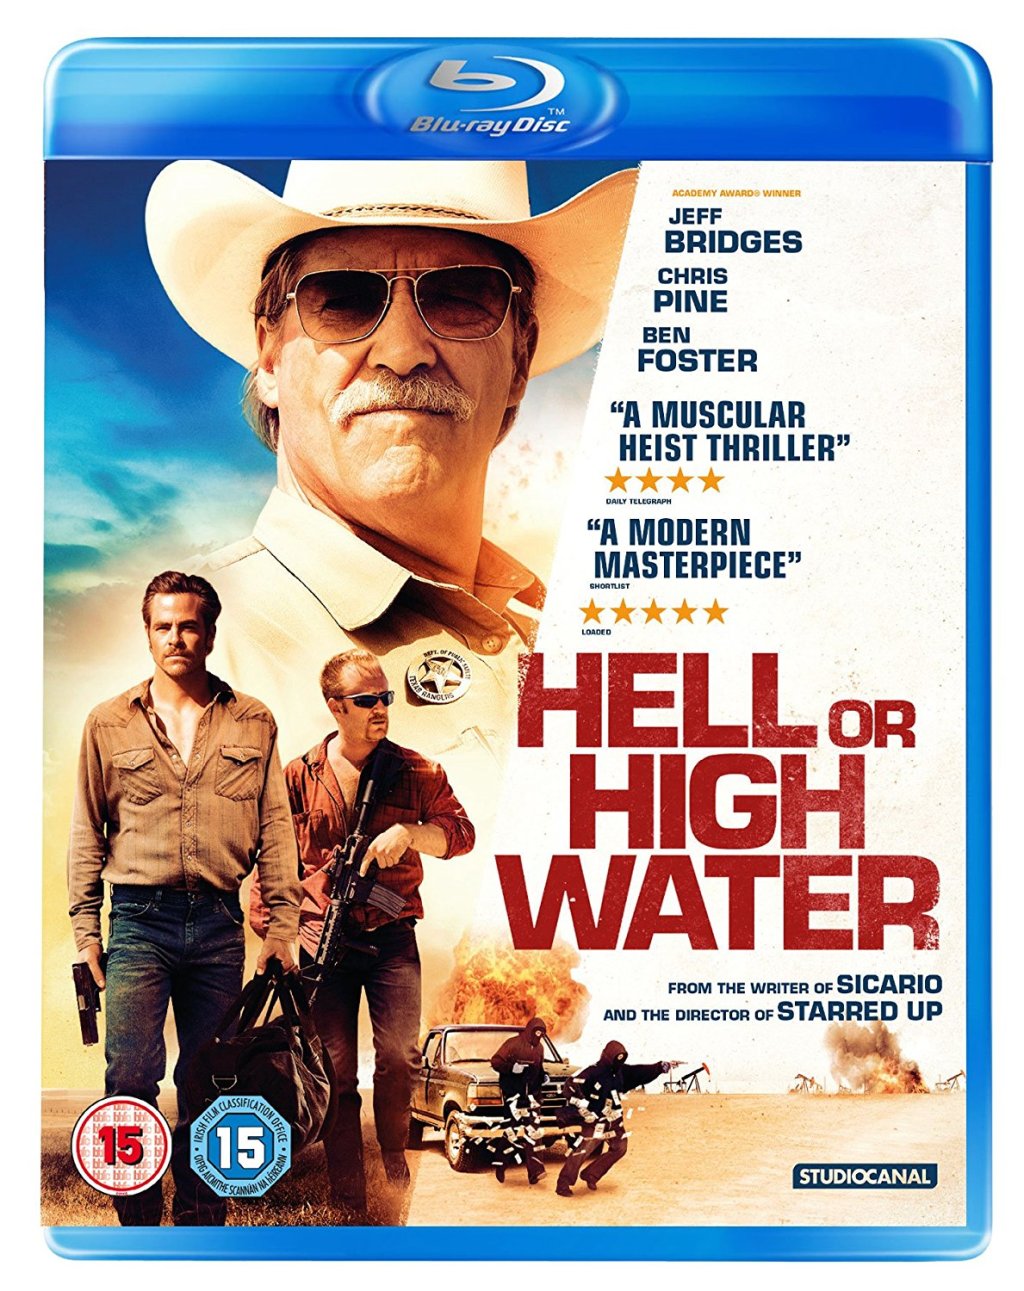 Hell or High Water Blu-ray Review: “A modern, compelling classic”